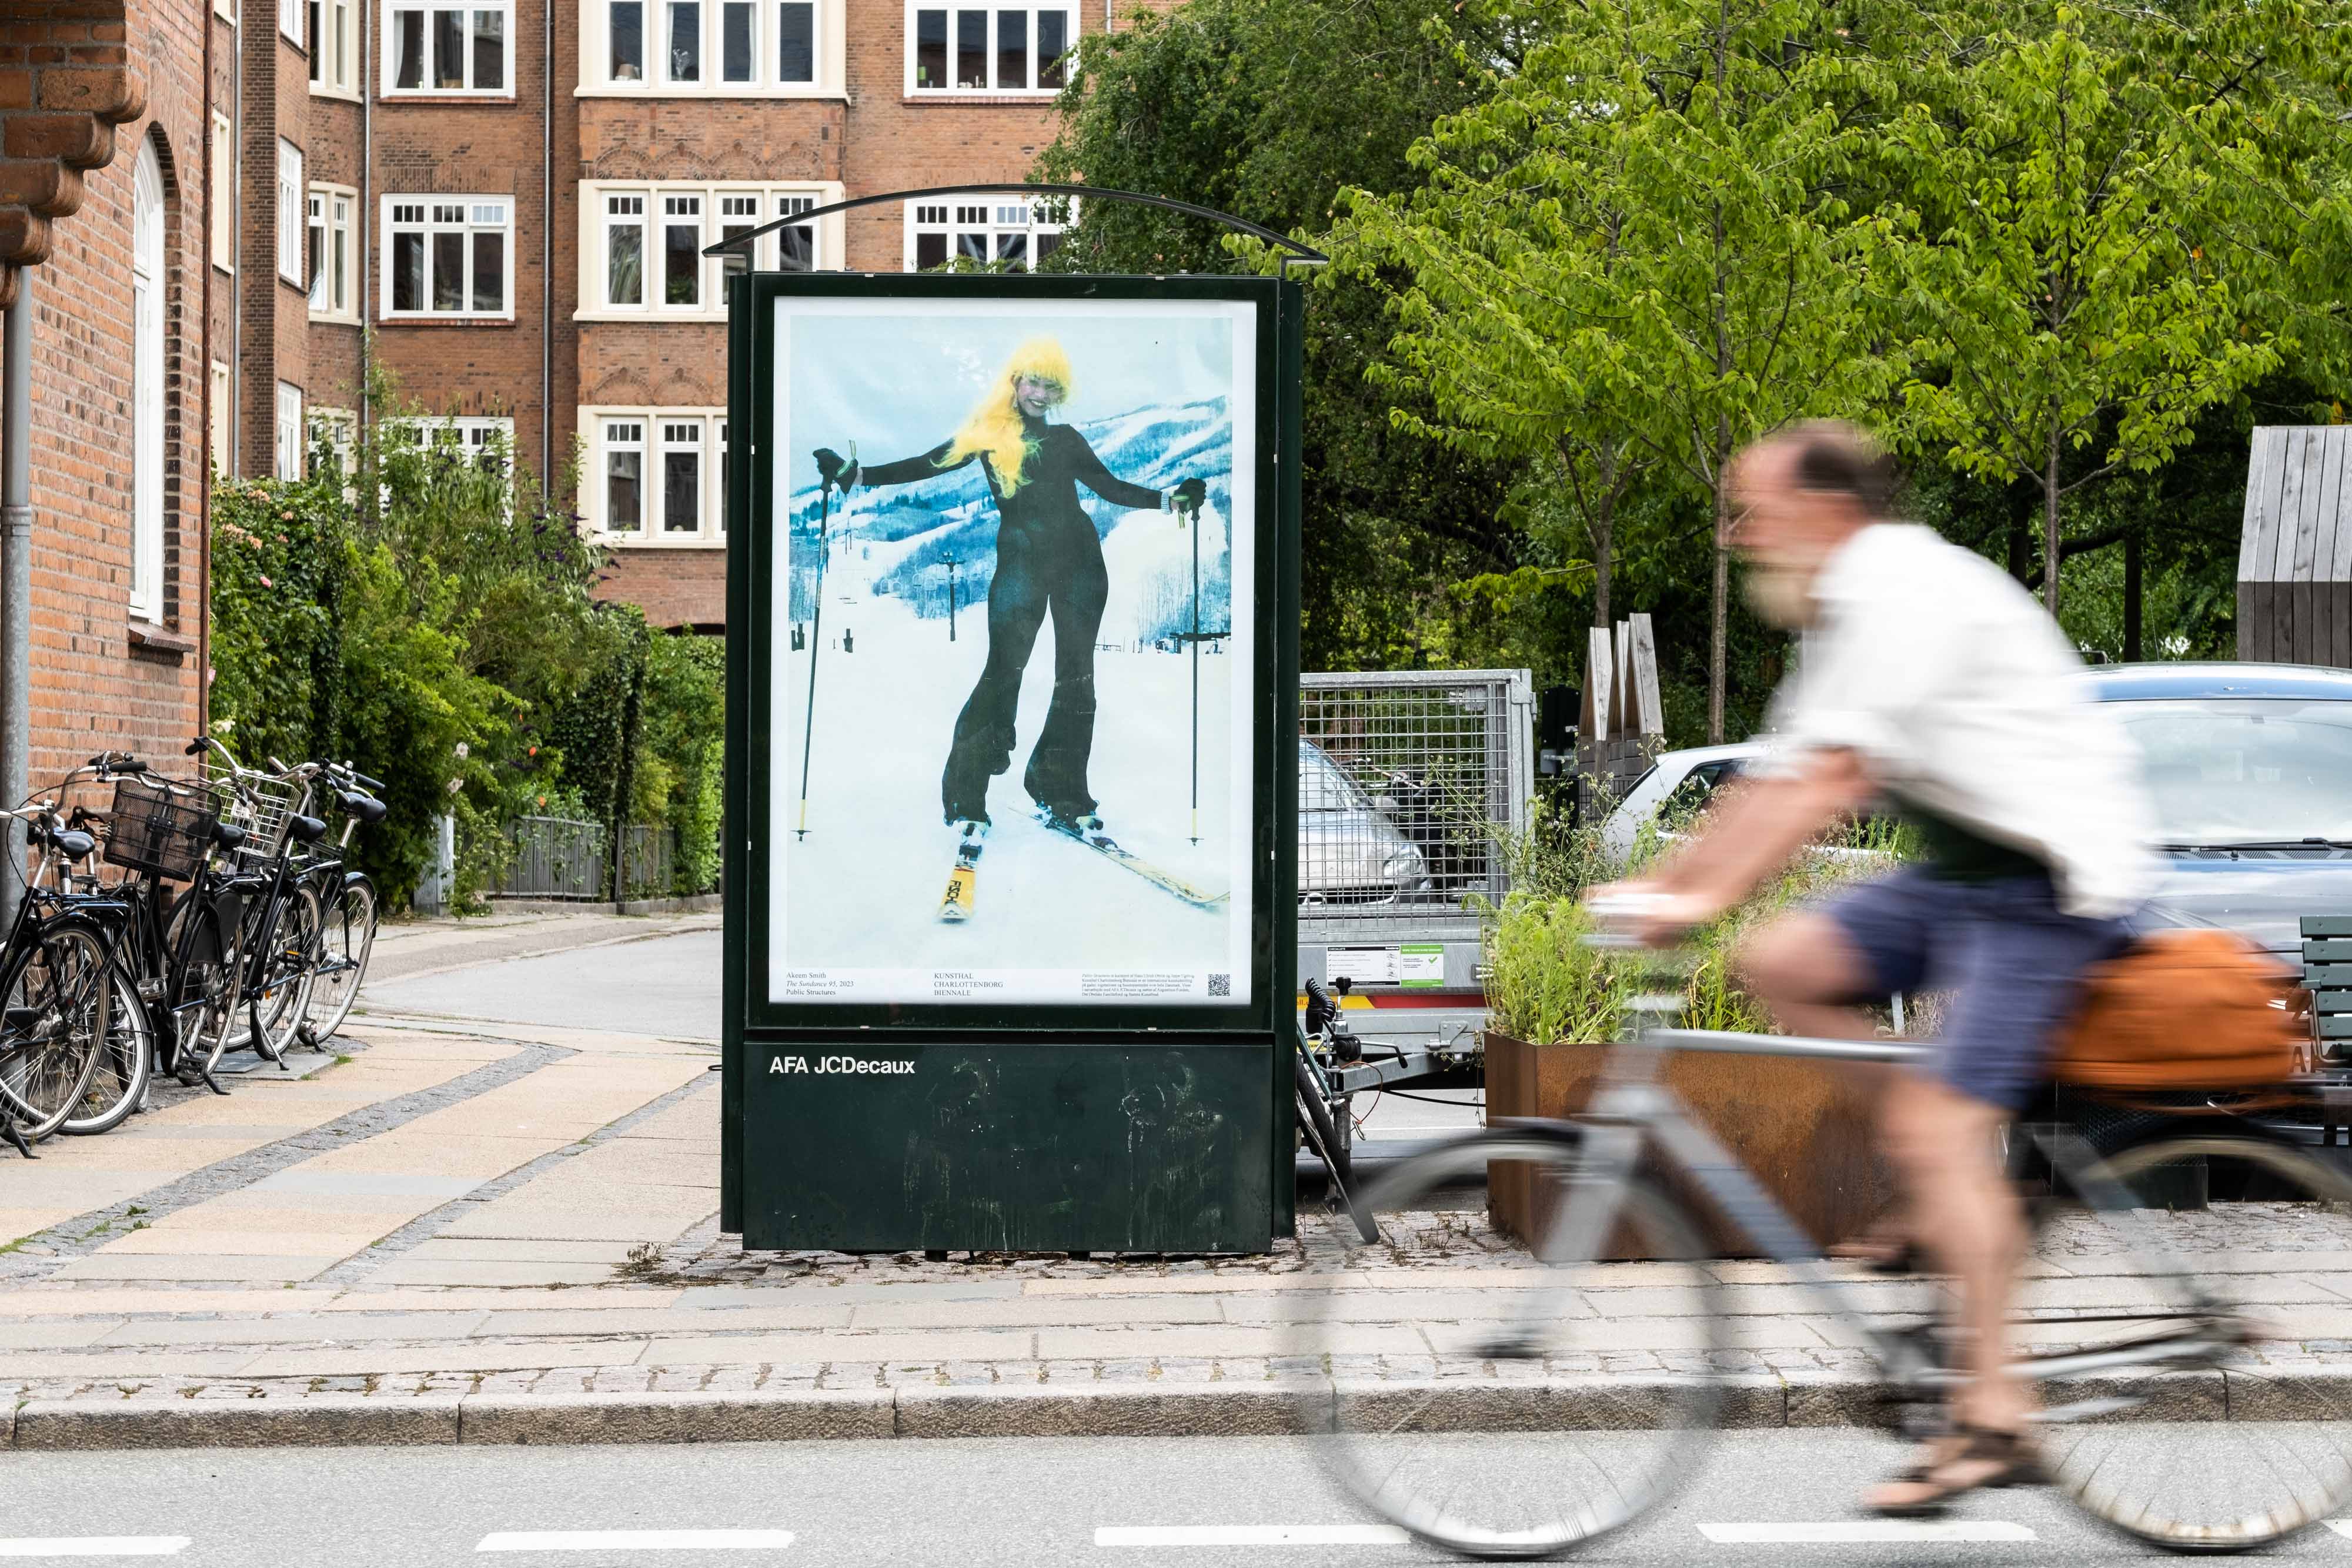 A billboard featuring a woman posing on a skiing slope.